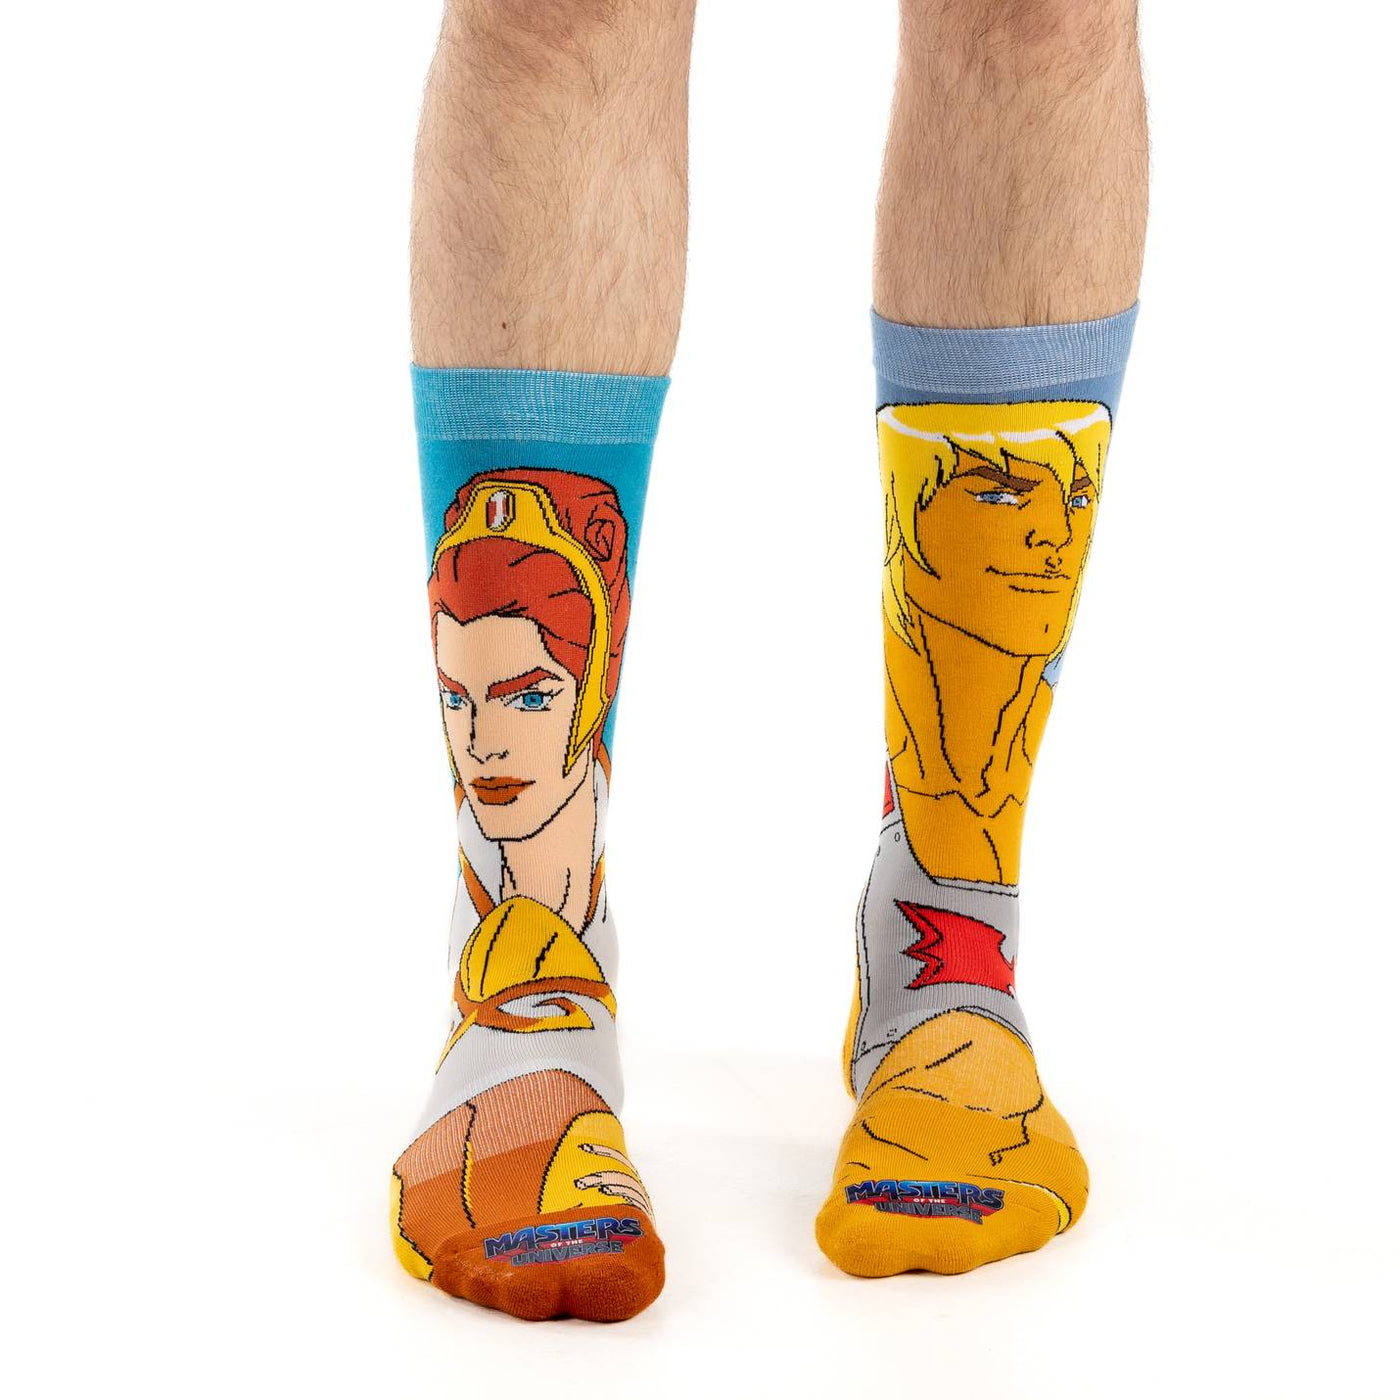 "Masters of the Universe, He-Man and Teela" Crew Socks by Good Luck Sock - Large